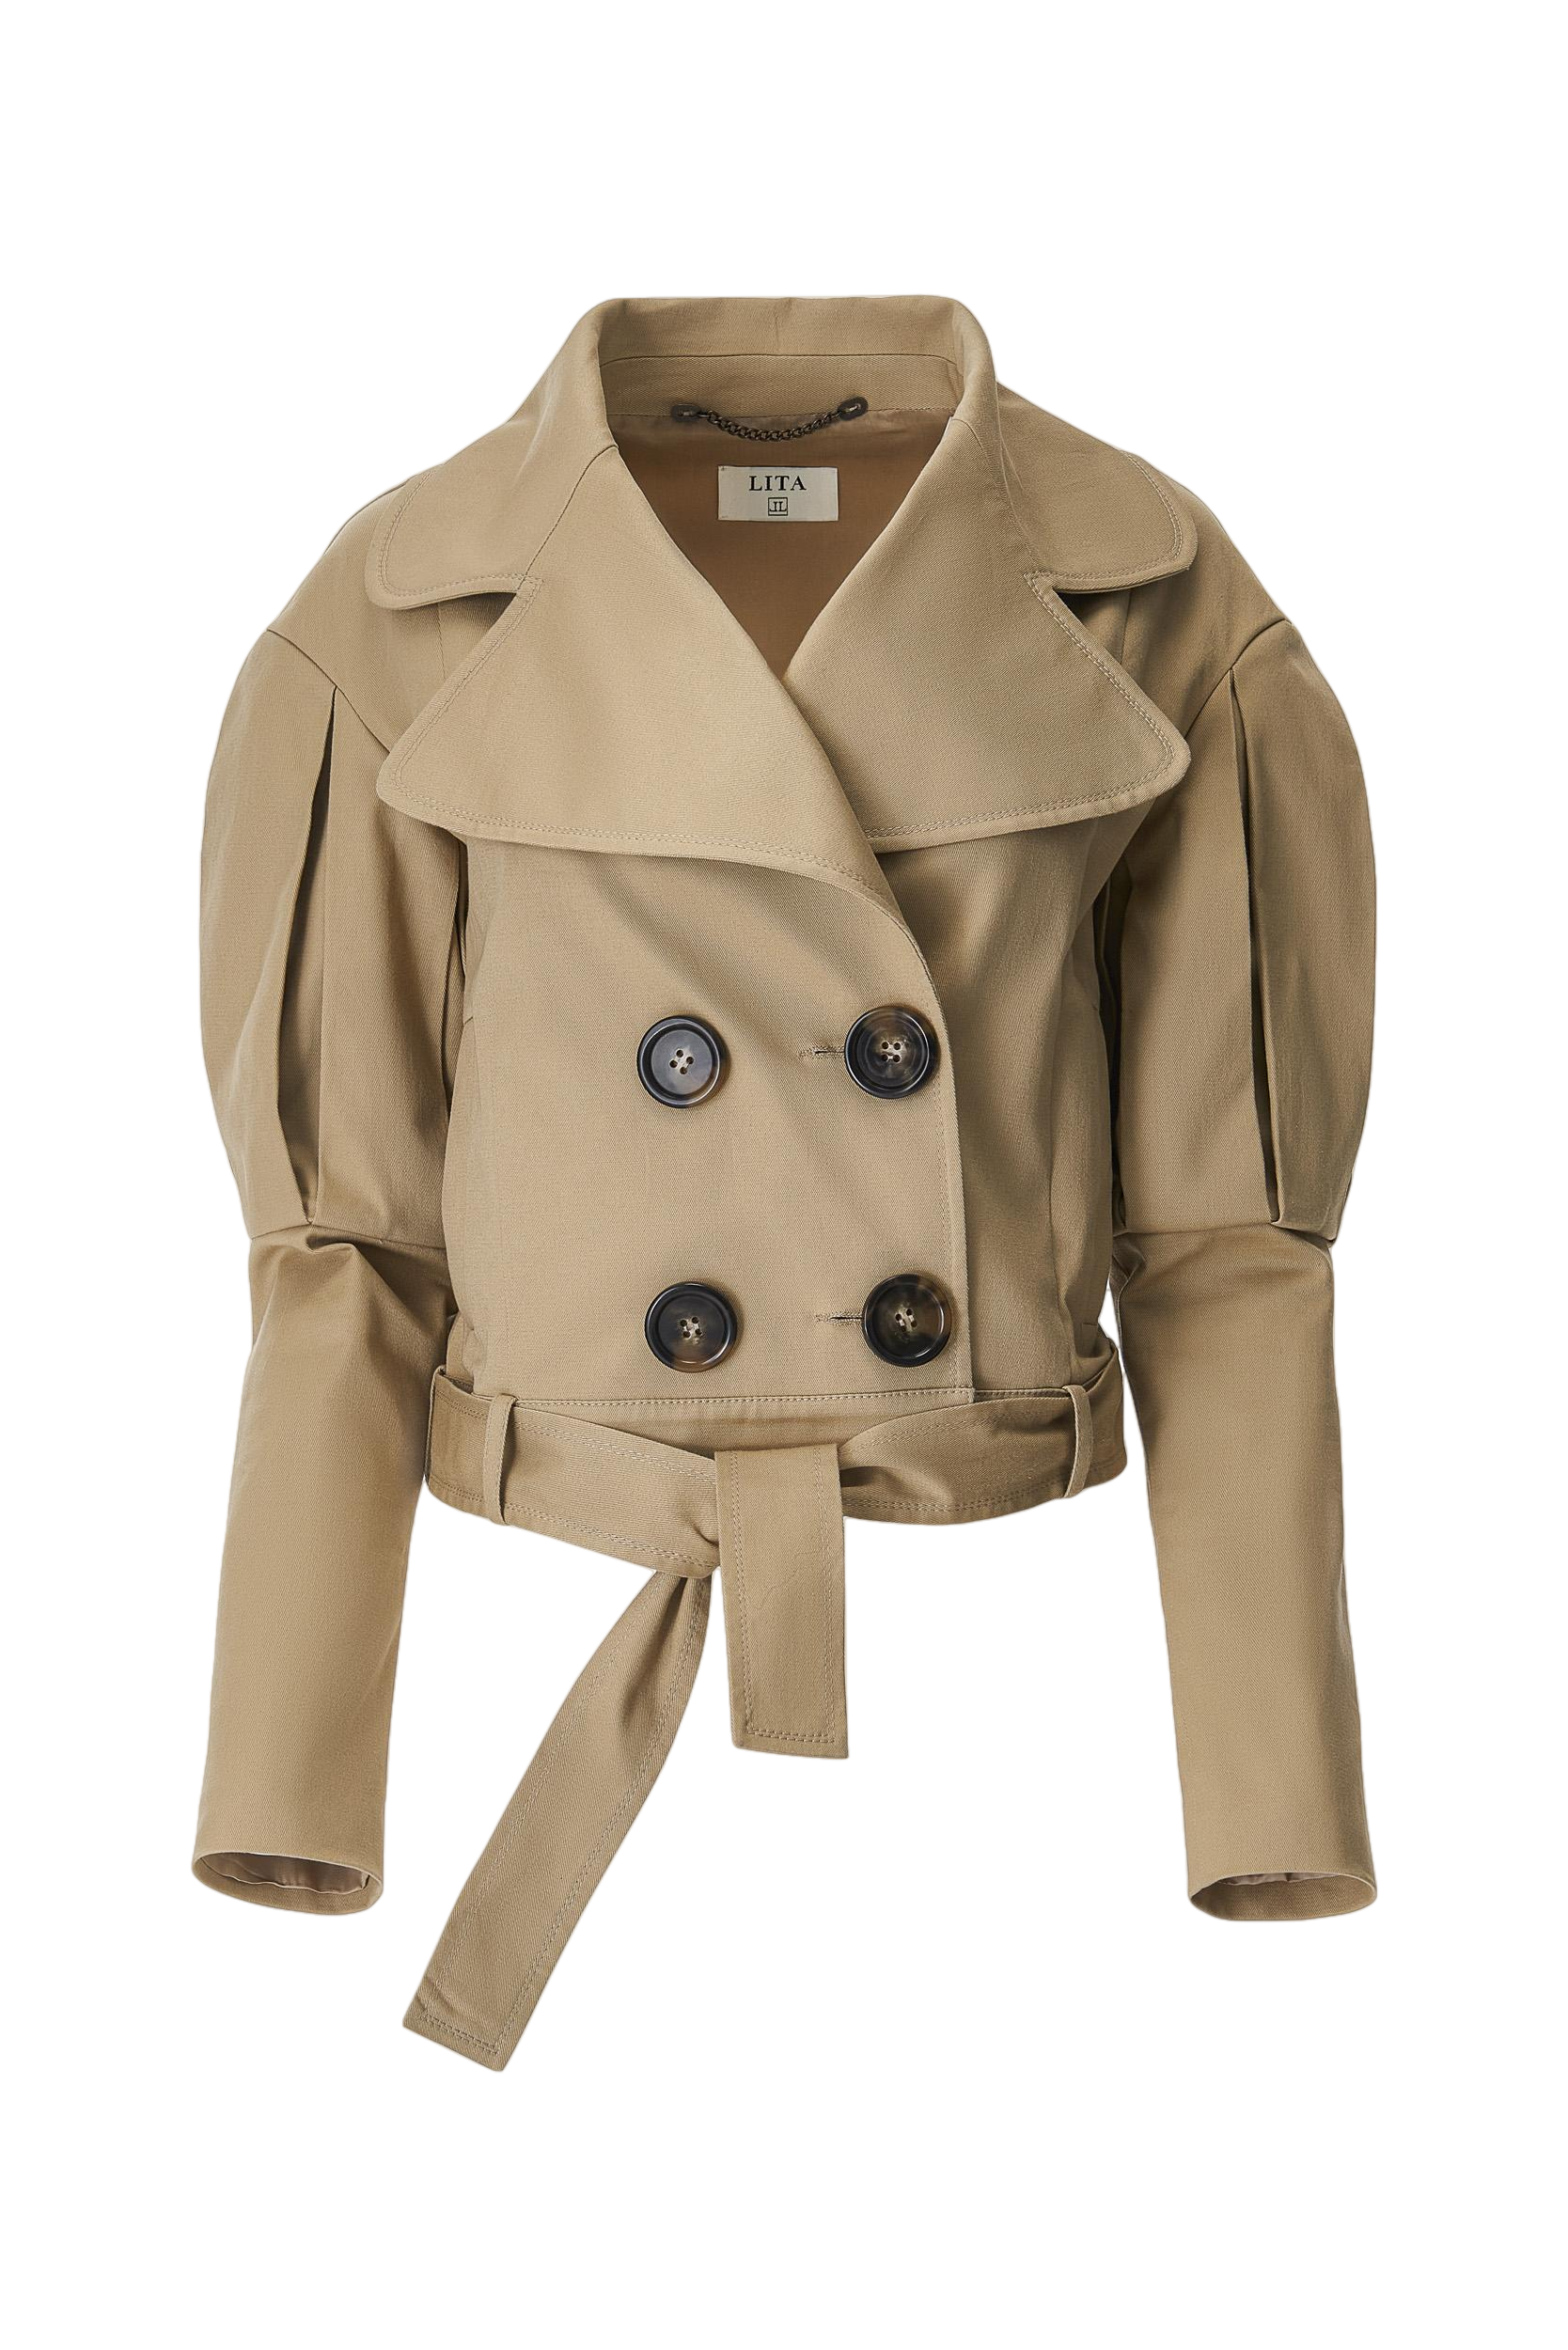 Lita Couture Statement Jacket With Oversized Lapels In  Beige